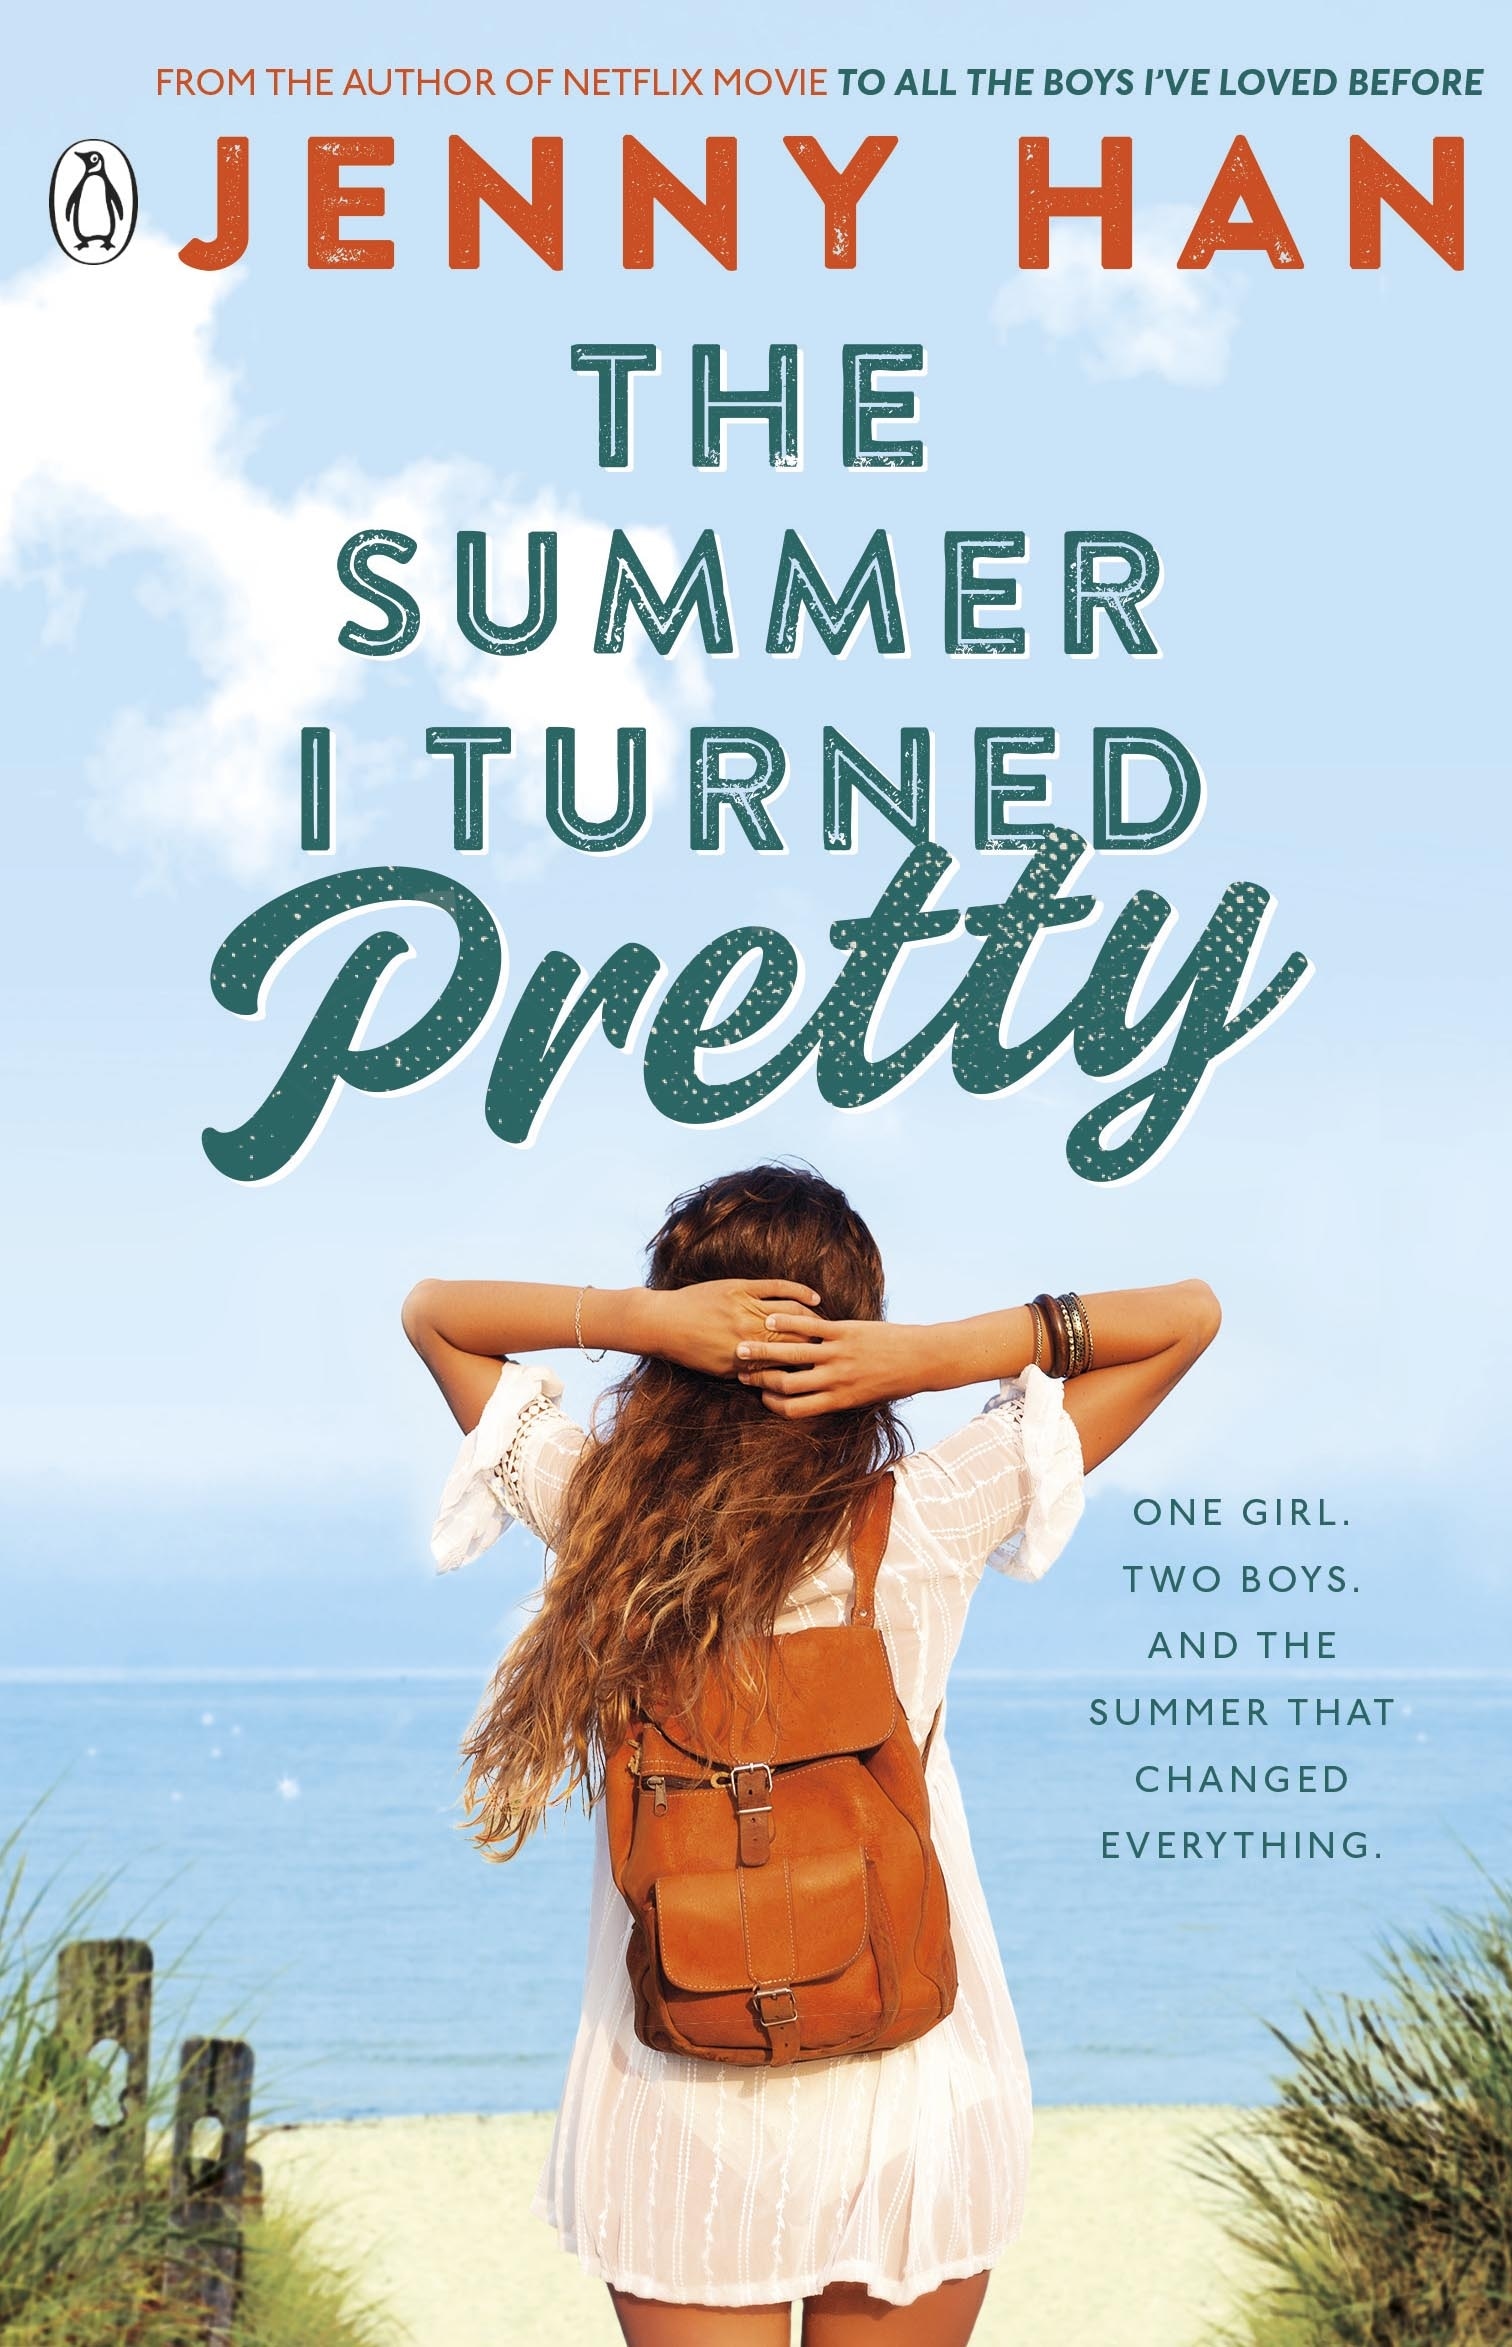 Book “The Summer I Turned Pretty” by Jenny Han — June 3, 2010